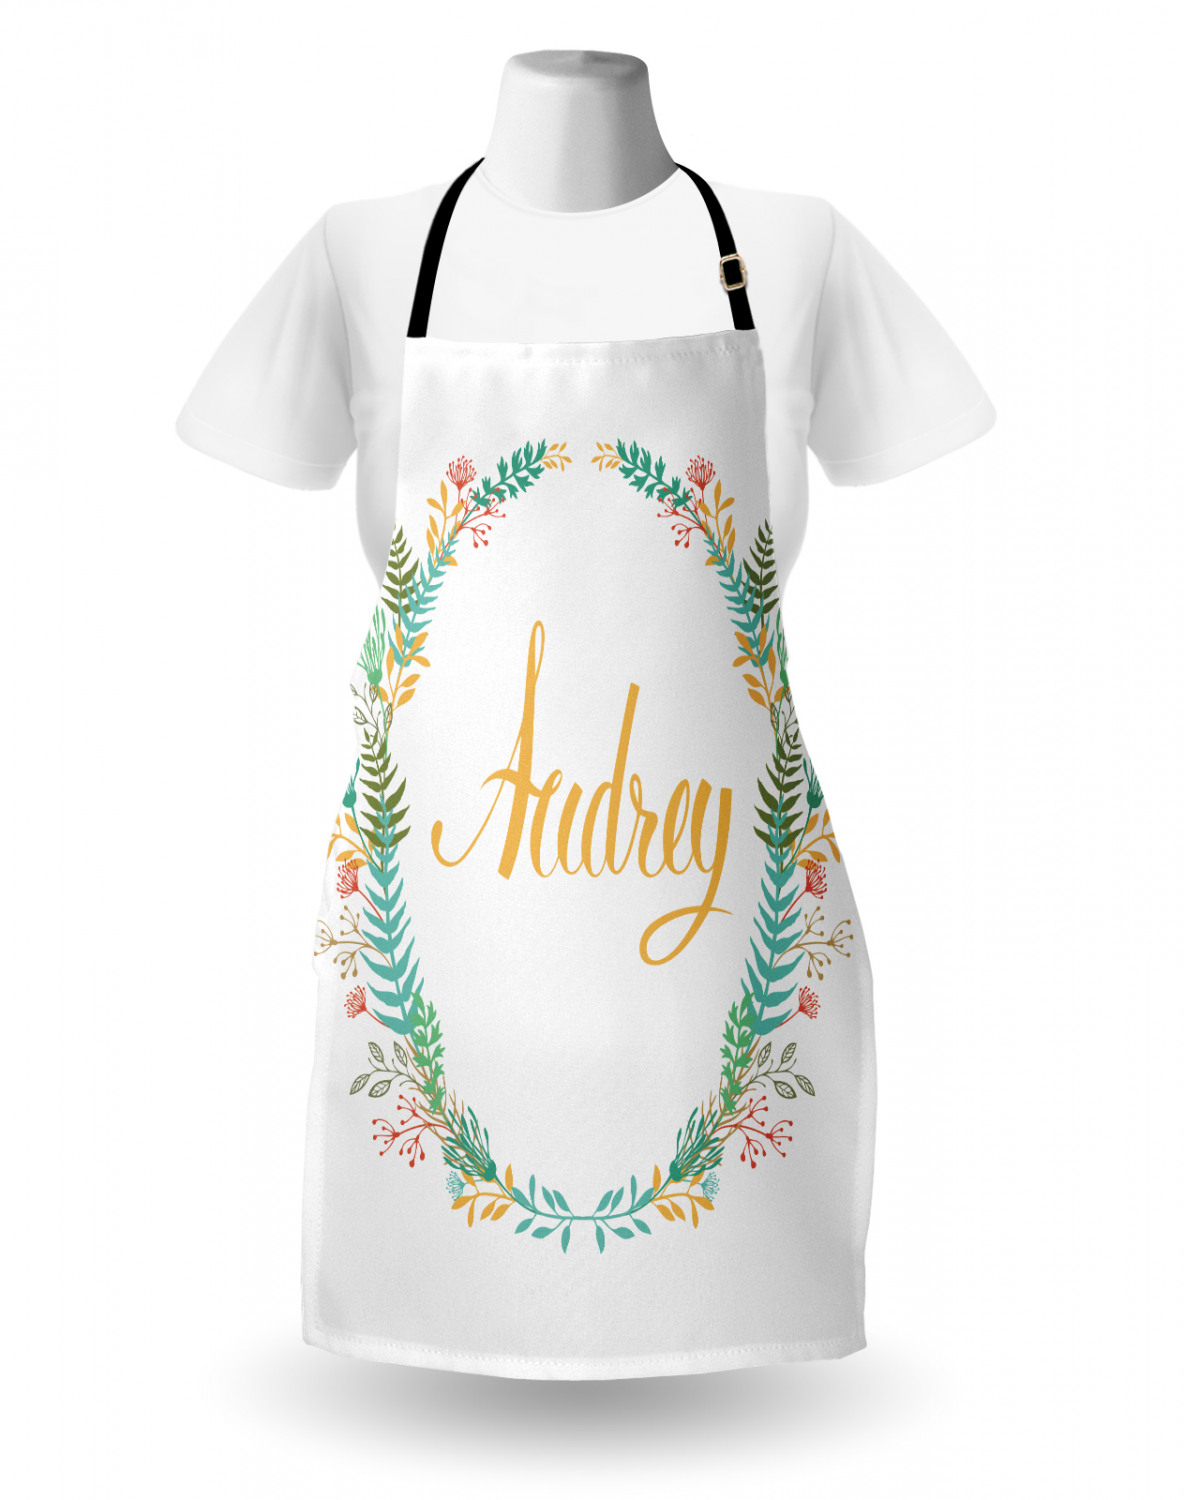 Name Apron Unisex Kitchen Bib with Adjustable Neck for Cooking ...